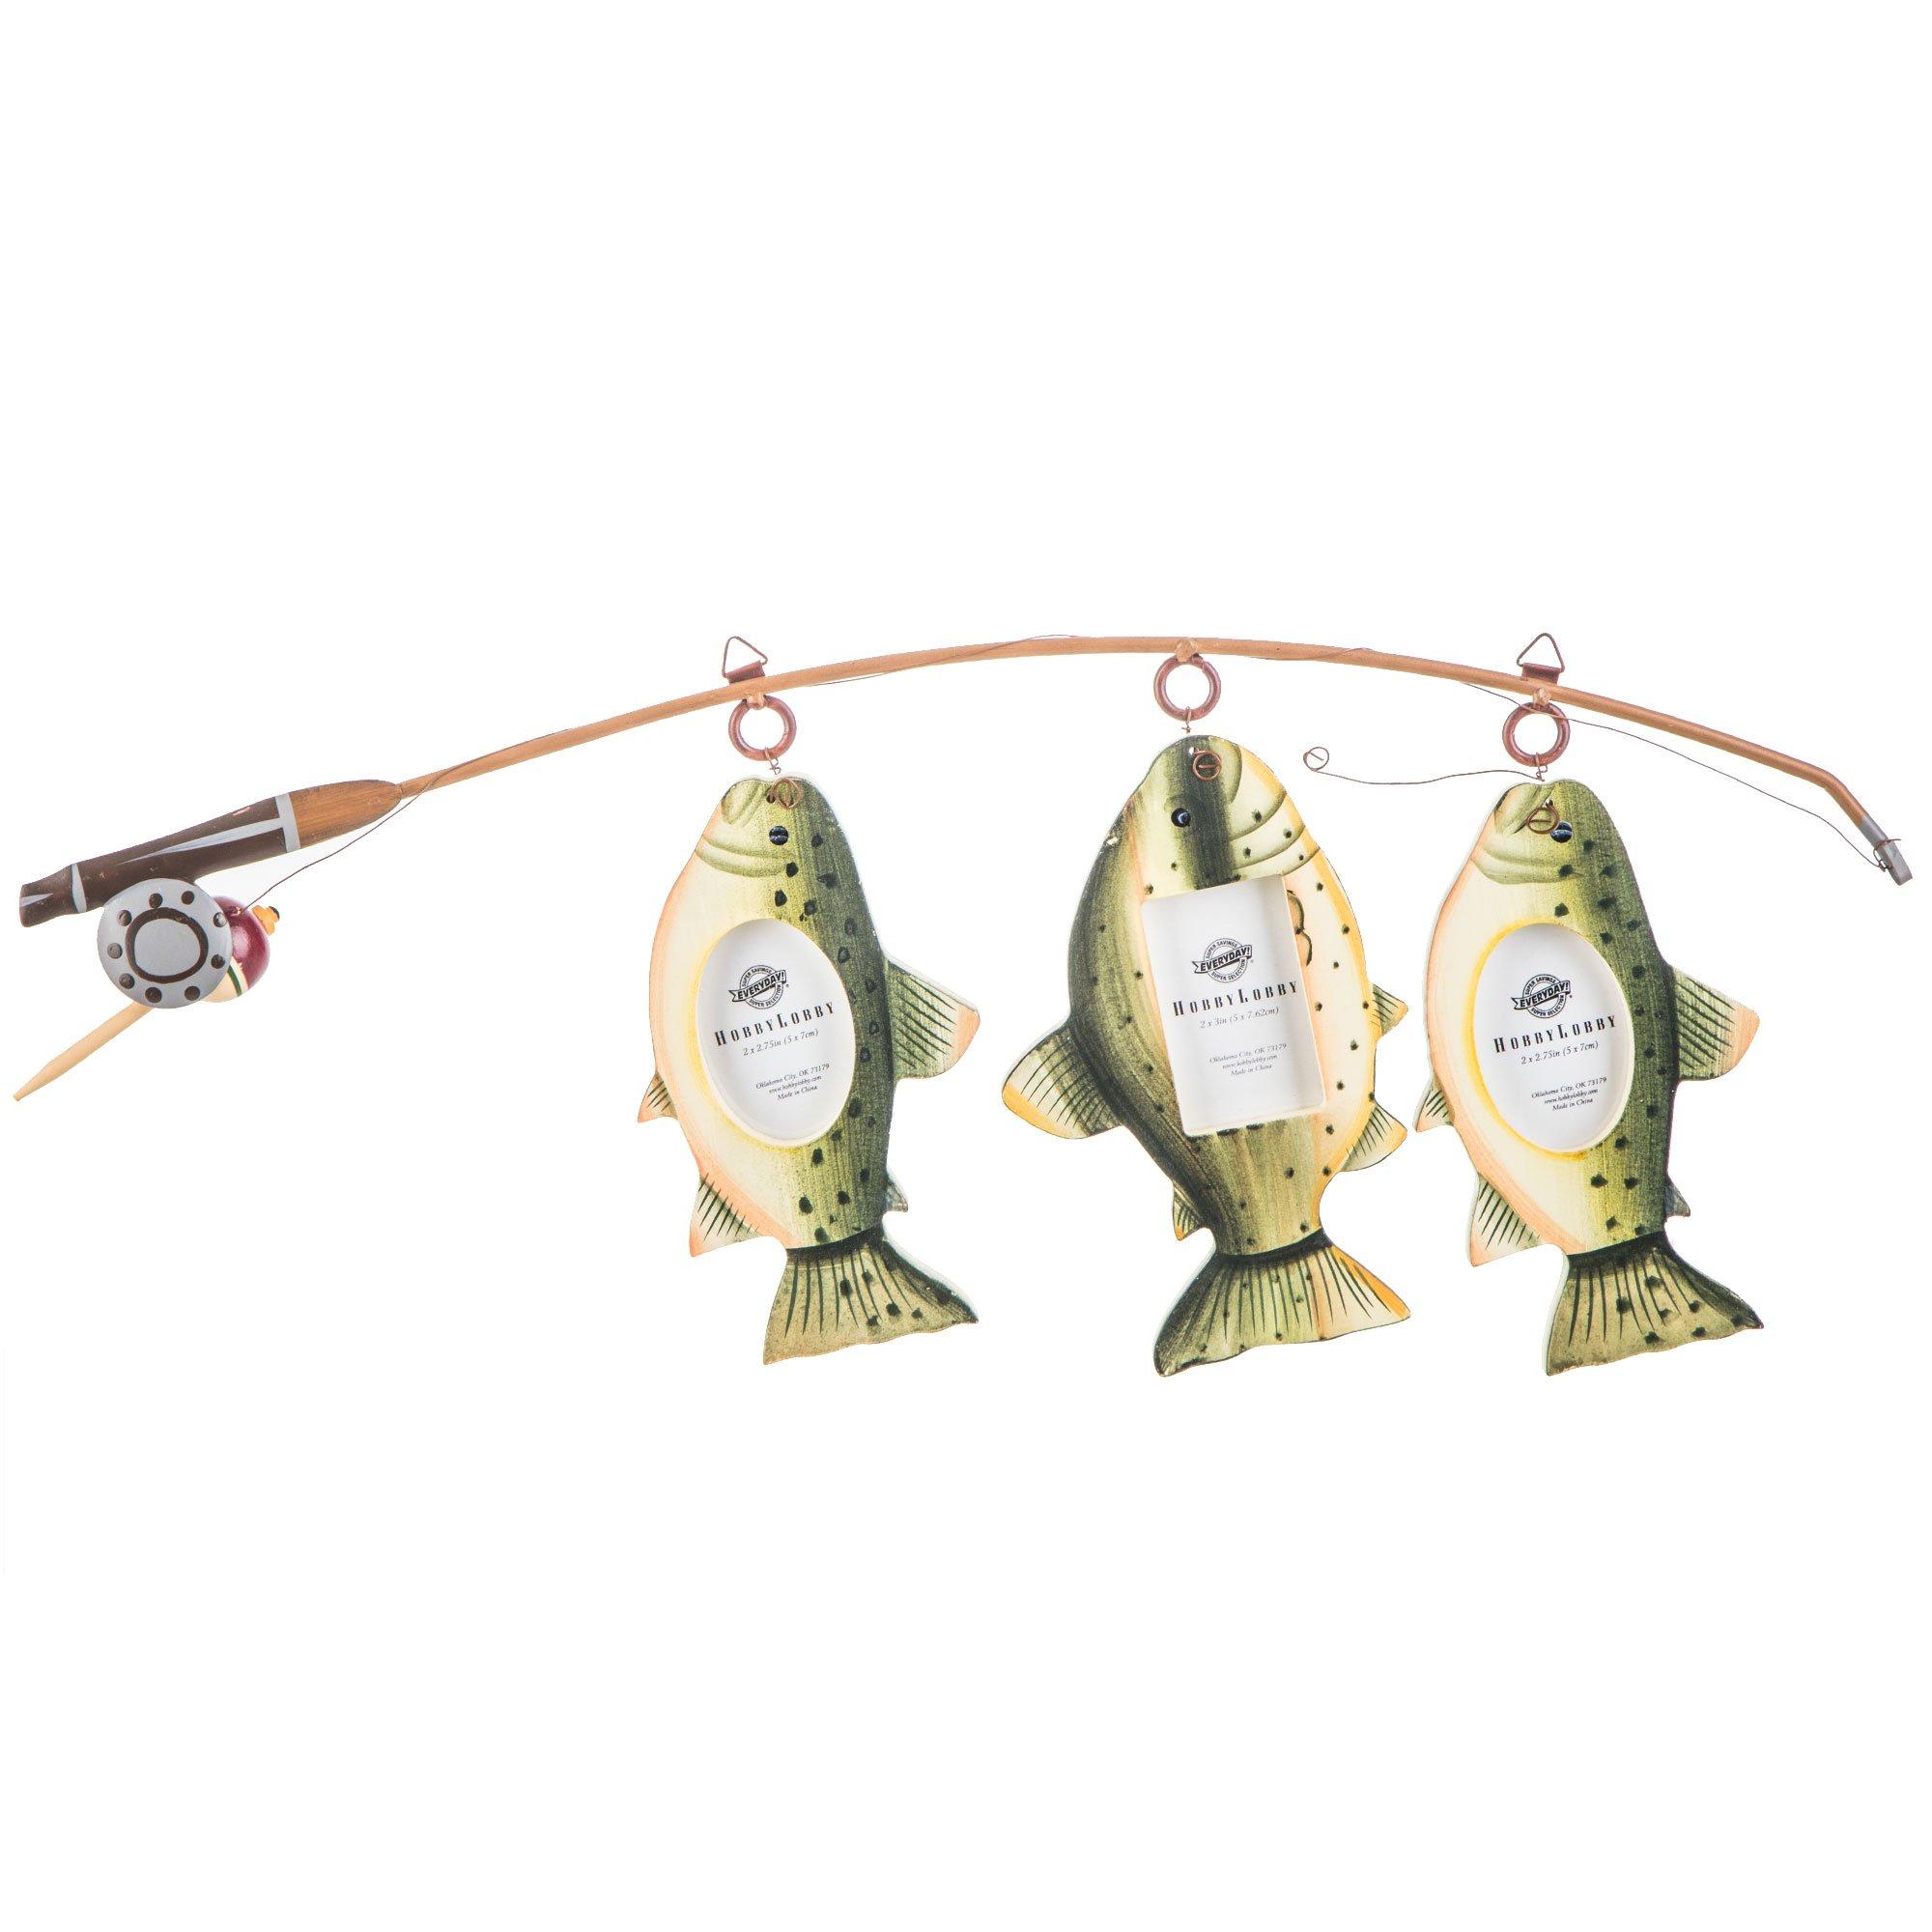 Walleye Fishing Picture Frame, Sports Picture Frames